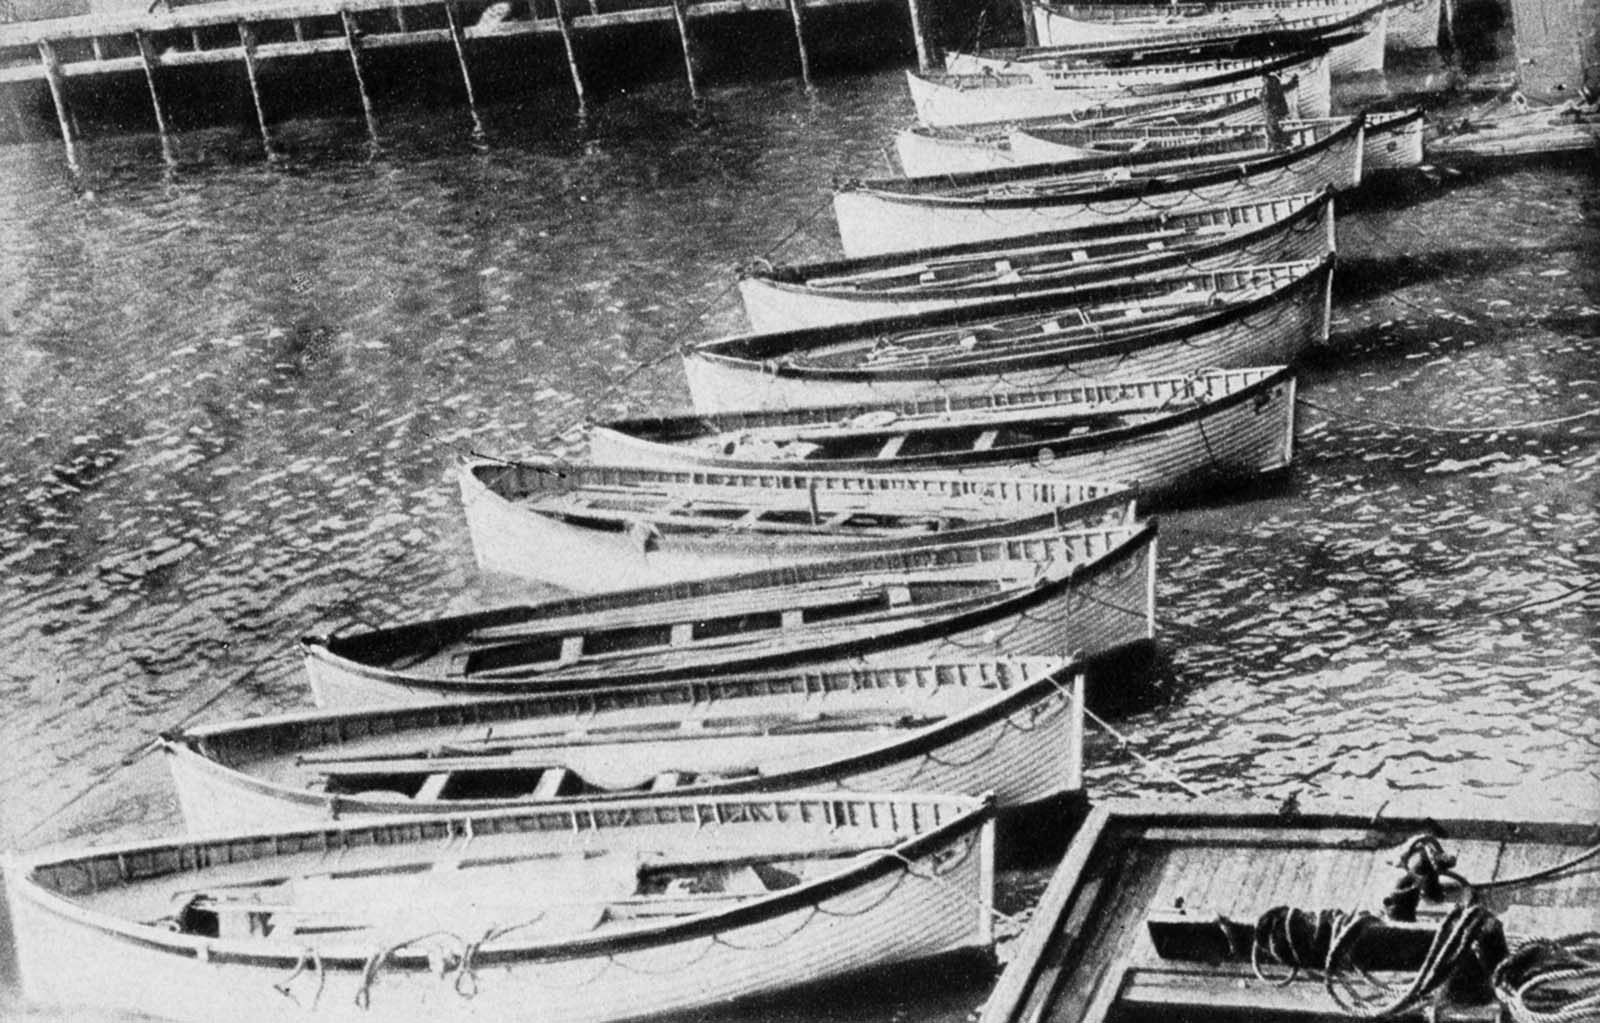 The Titanic’s lifeboats are returned to the berth of the White Star Line in New York.